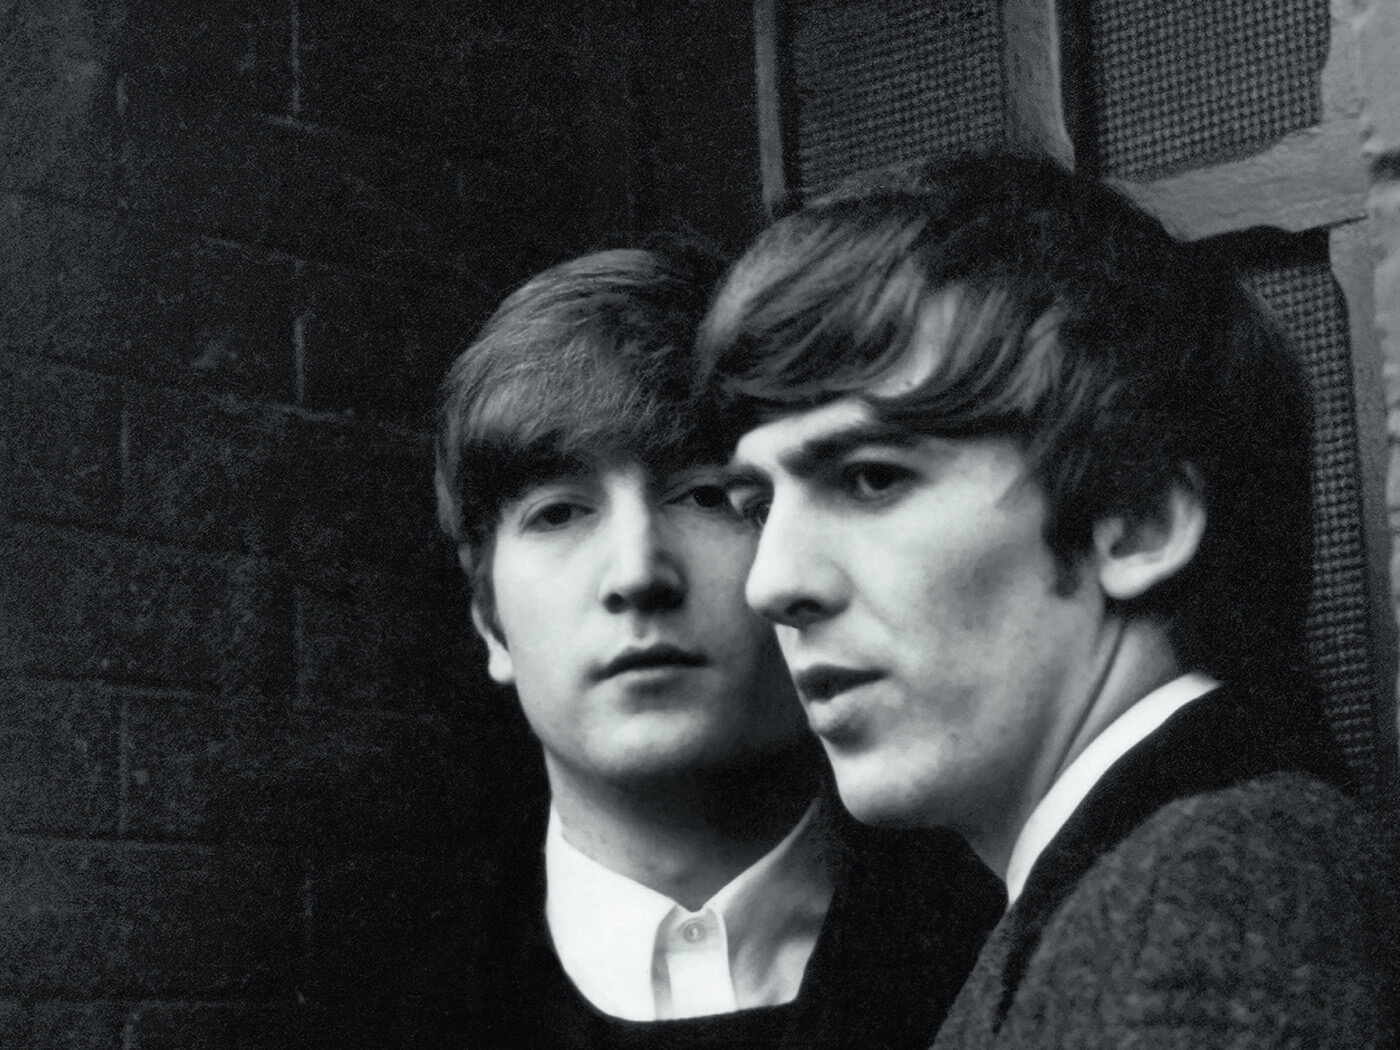 a black and white image from Paul McCartney's new photography book '1964: Eyes Of The Storm'